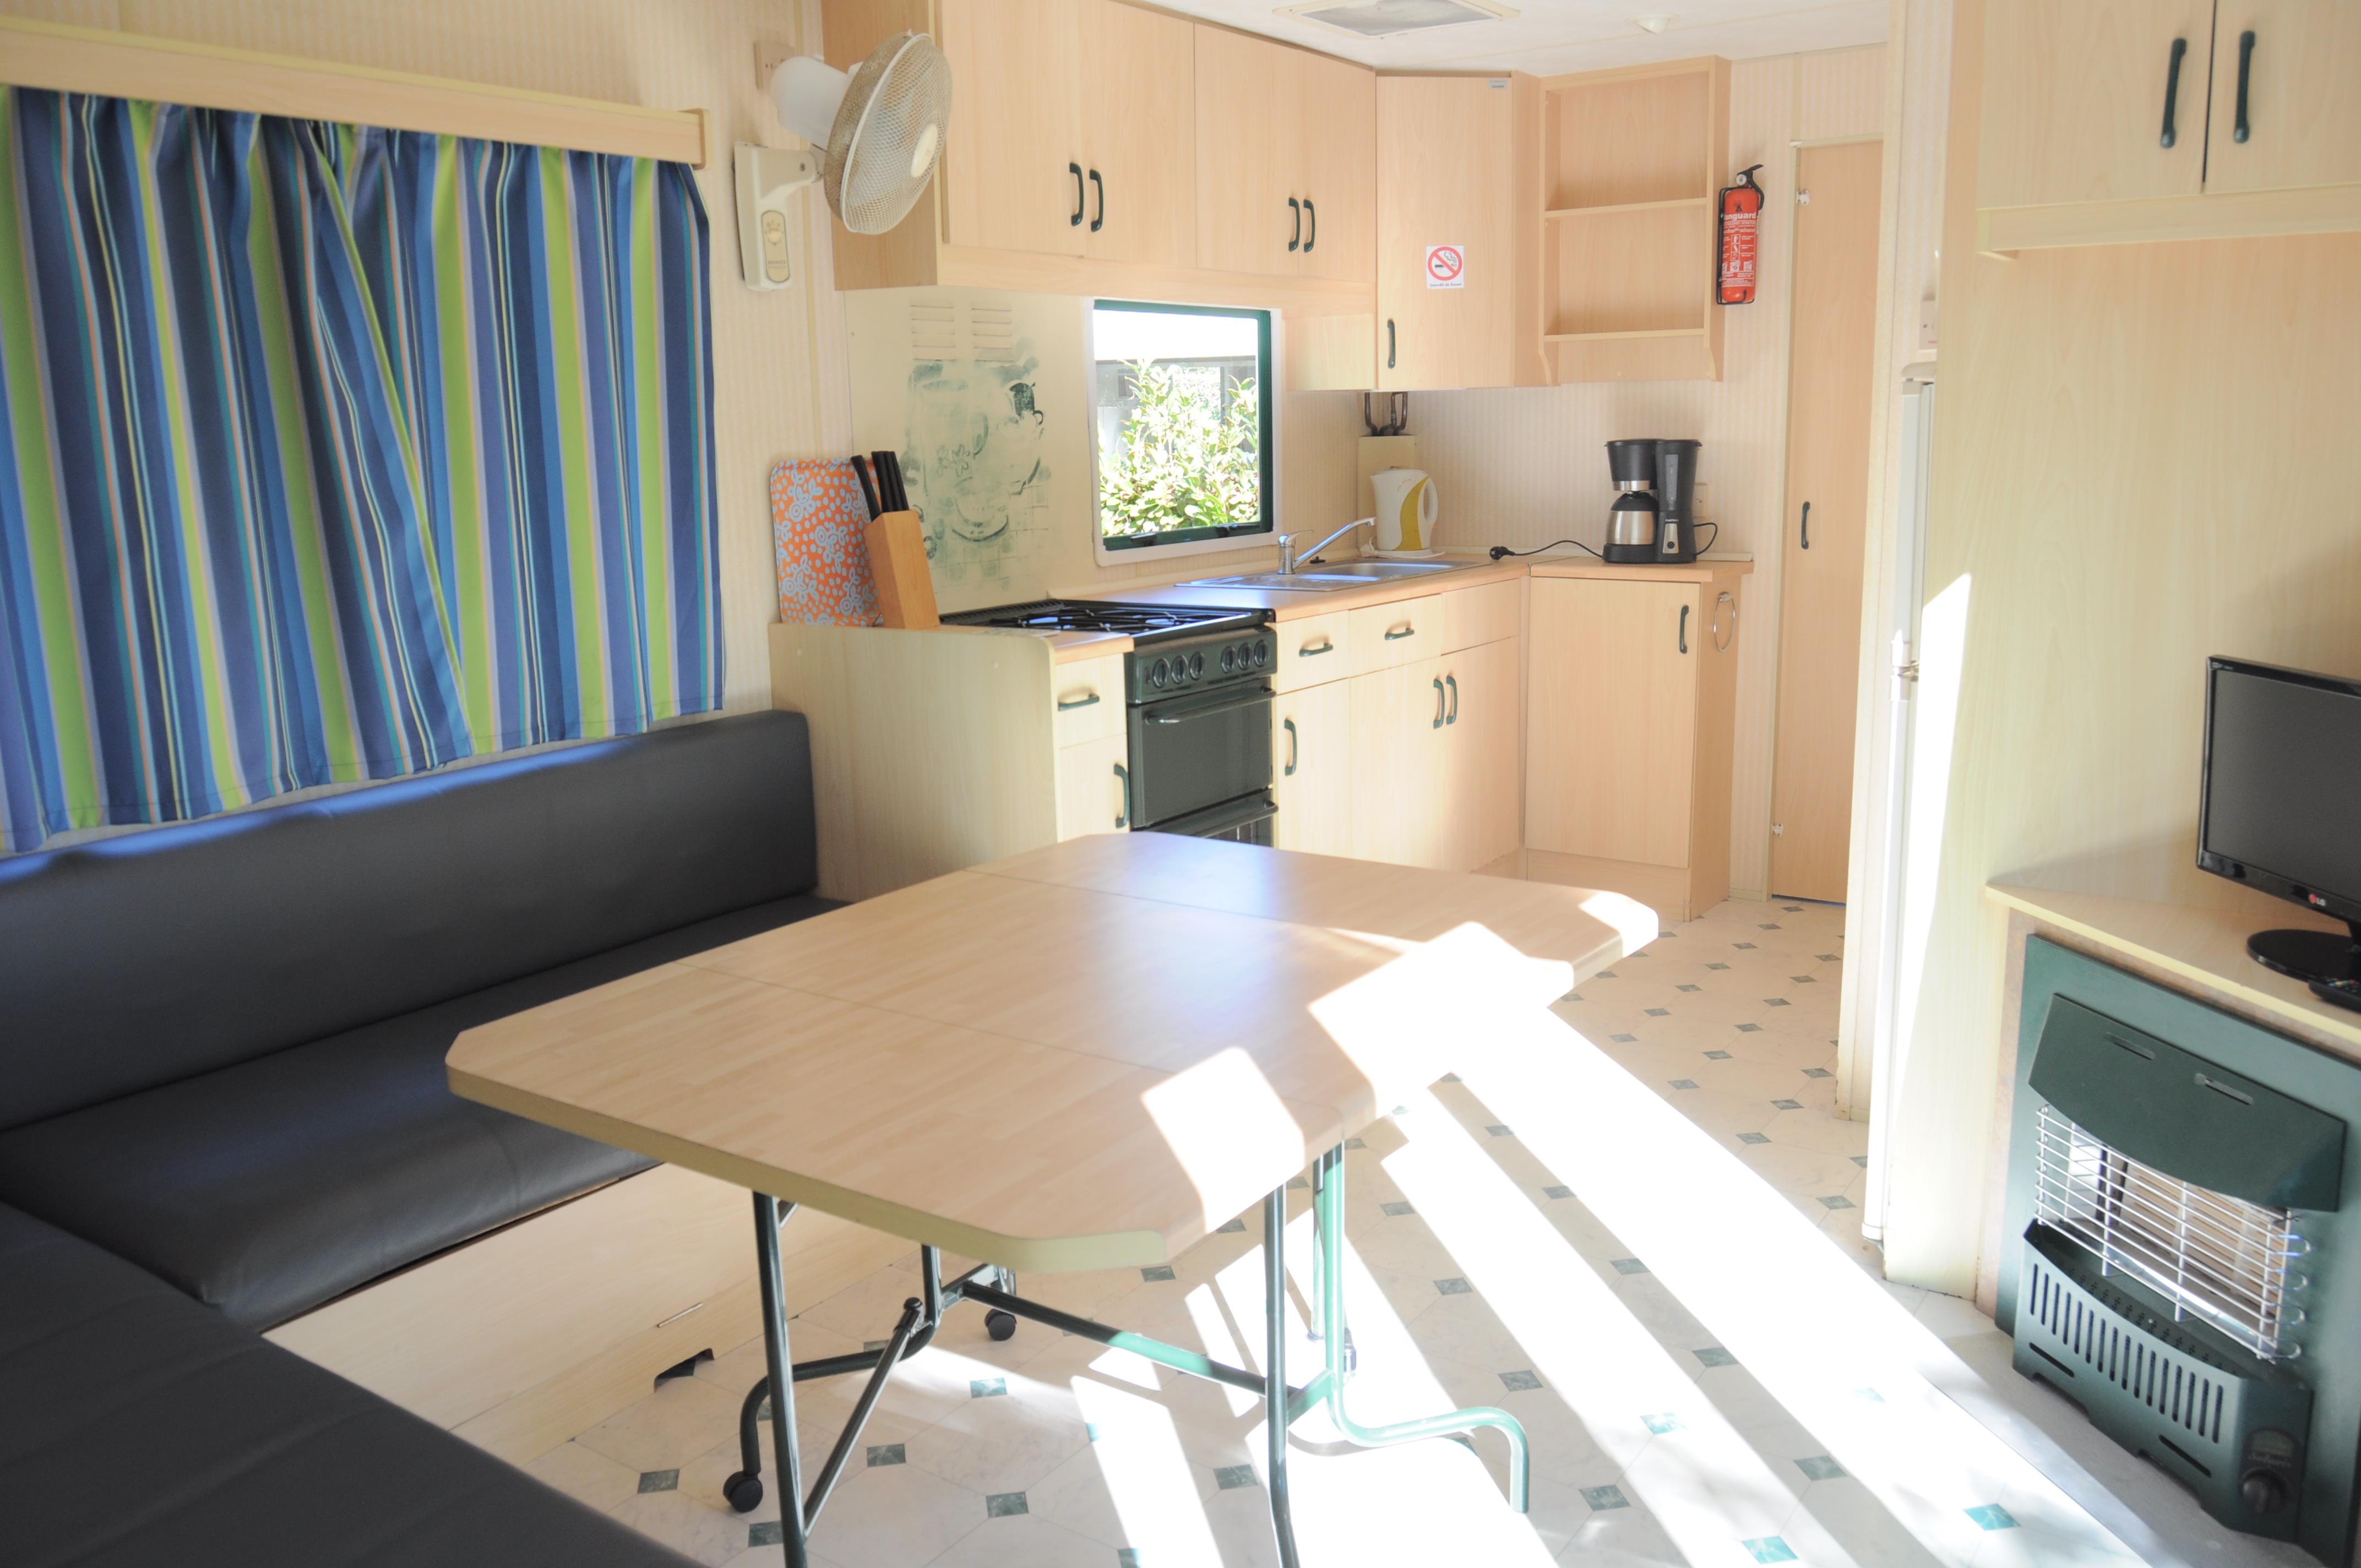 Location - Mobilhome Simply Eco 2 Chambres 25.80M² - Camping International Le Raguenès Plage